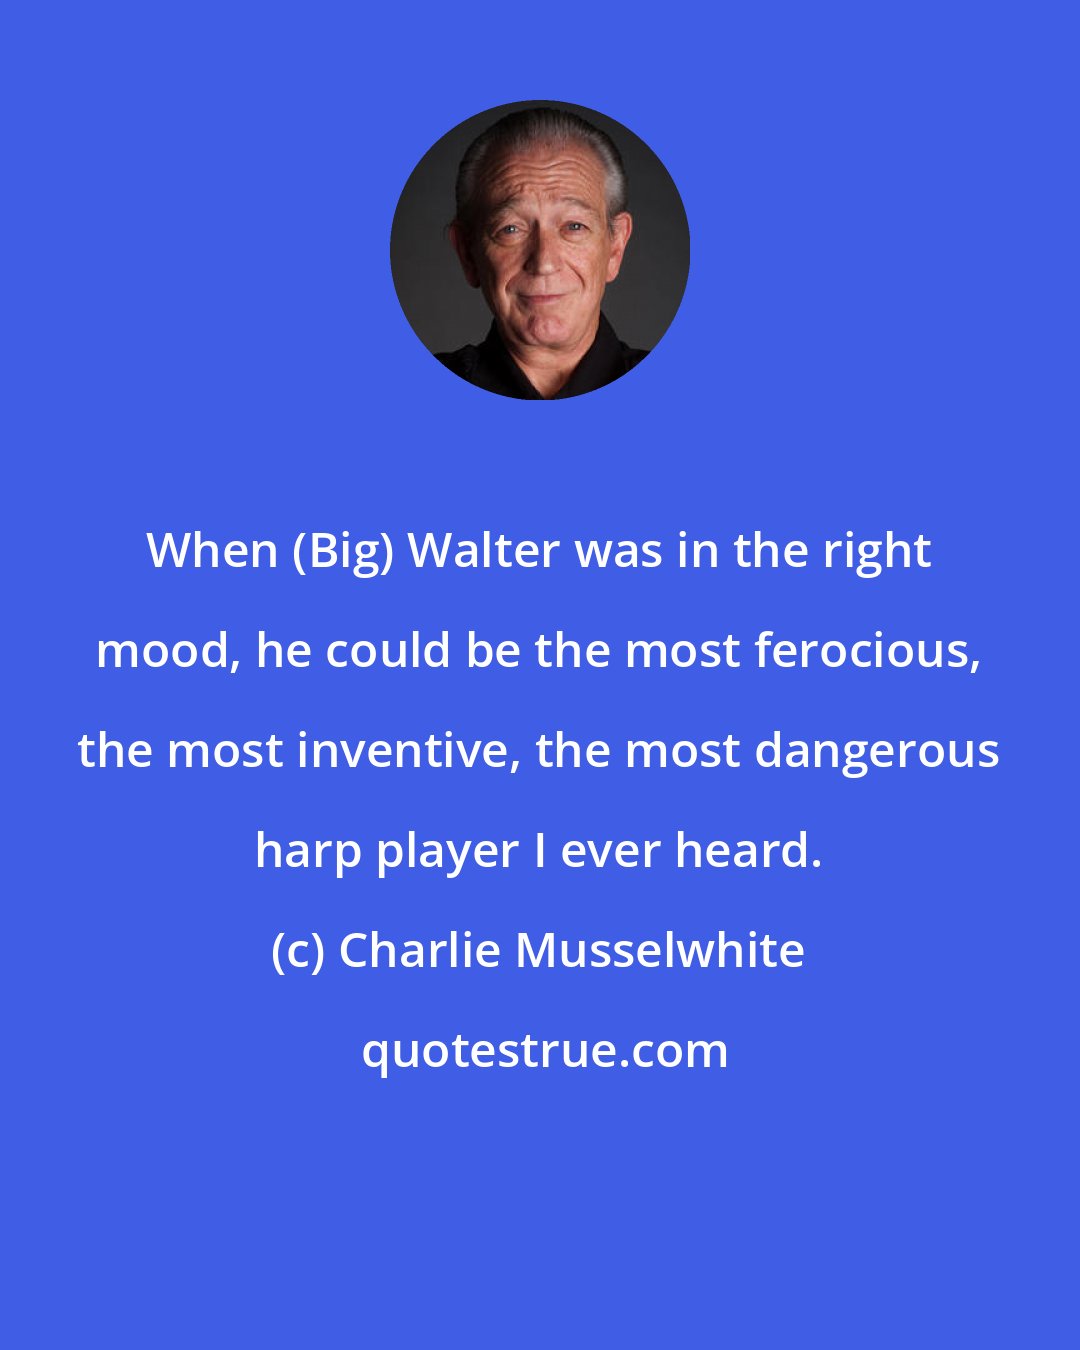 Charlie Musselwhite: When (Big) Walter was in the right mood, he could be the most ferocious, the most inventive, the most dangerous harp player I ever heard.